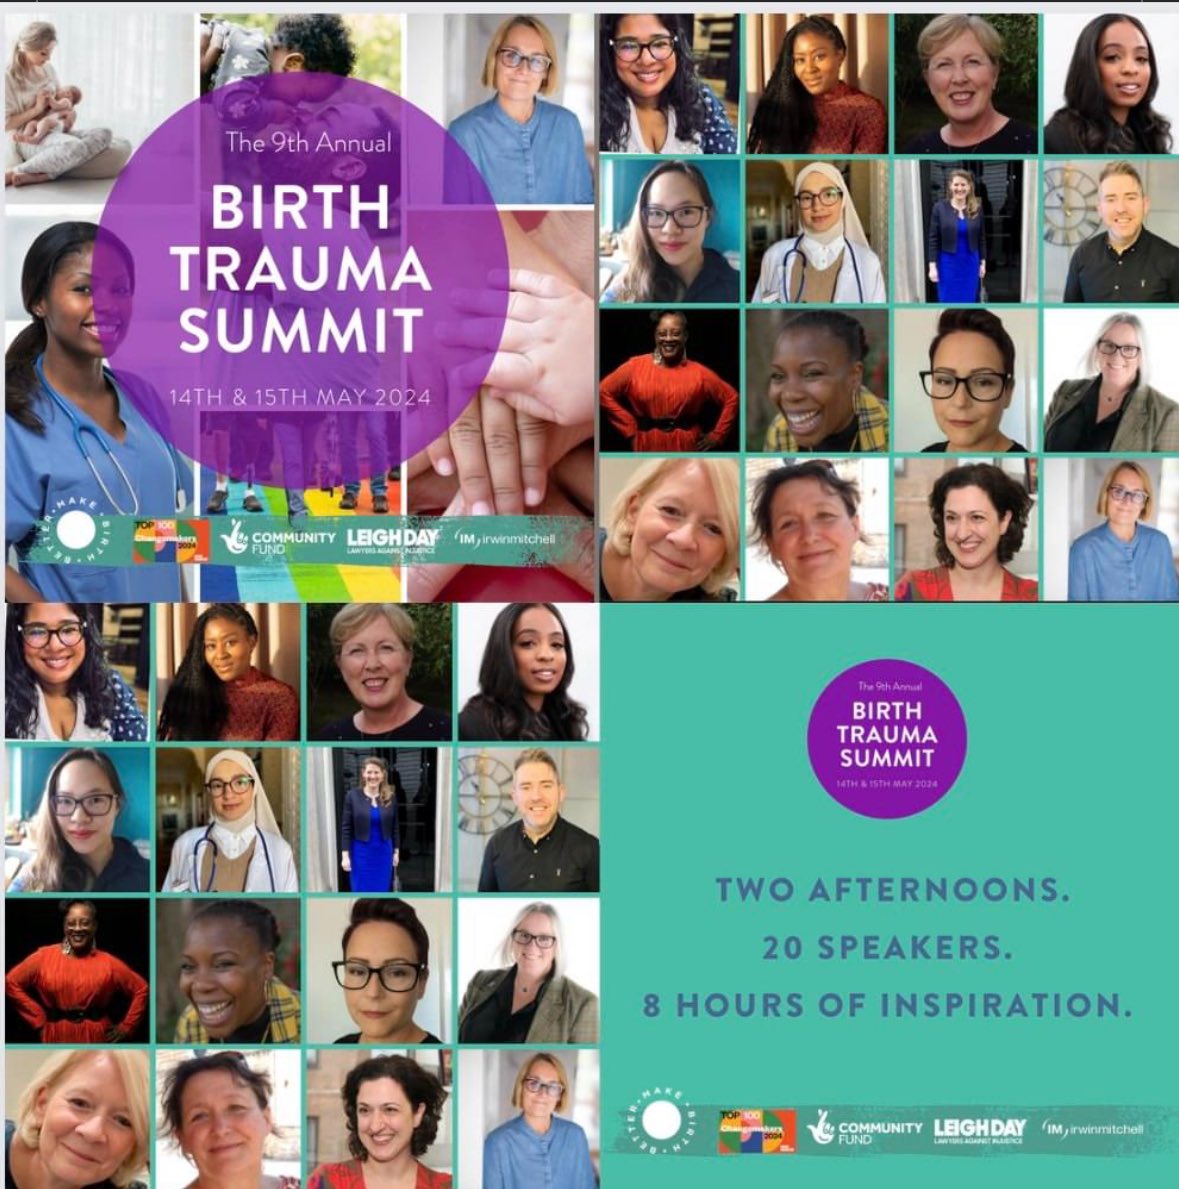 I’m thrilled to share with you that on 15th May I will be speaking at Make Birth Better’s 9th Annual Birth Trauma Summit.@birth_better @theodoraclarke #dad #maternity #family #mums For more information visit makebirthbetter.org/annual-birth-t…